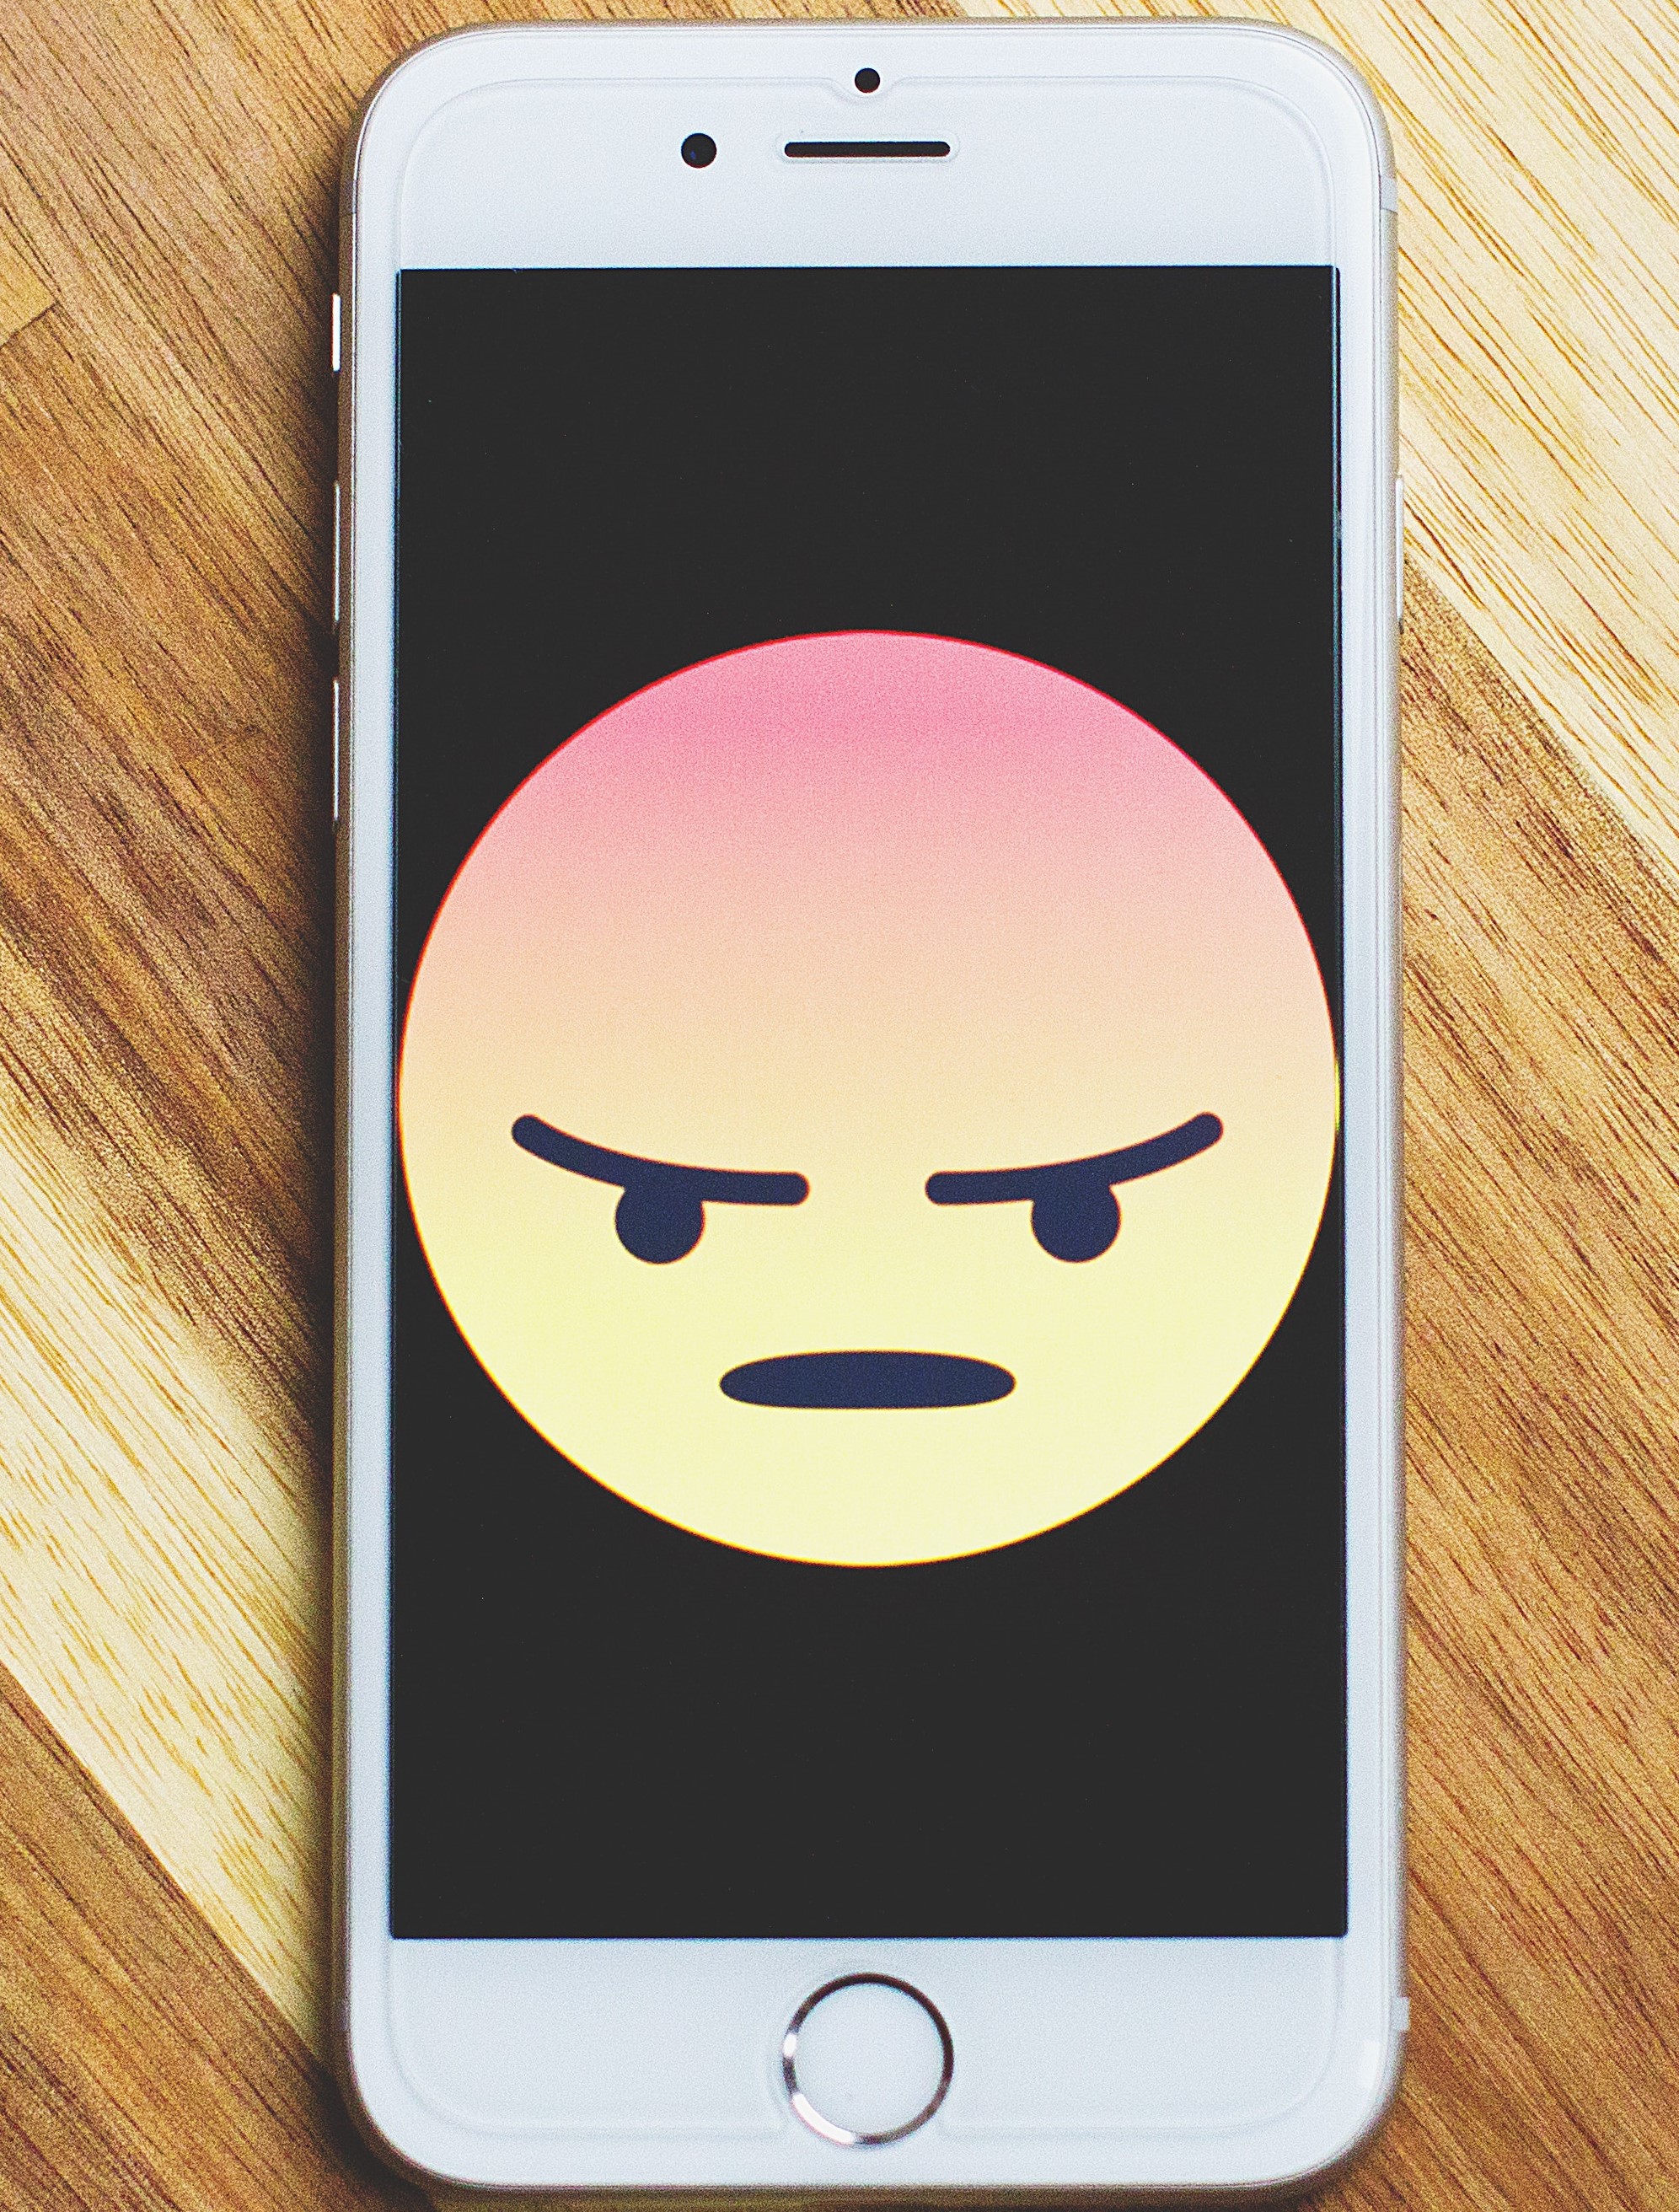 Phone with angry emoji displayed on the screen